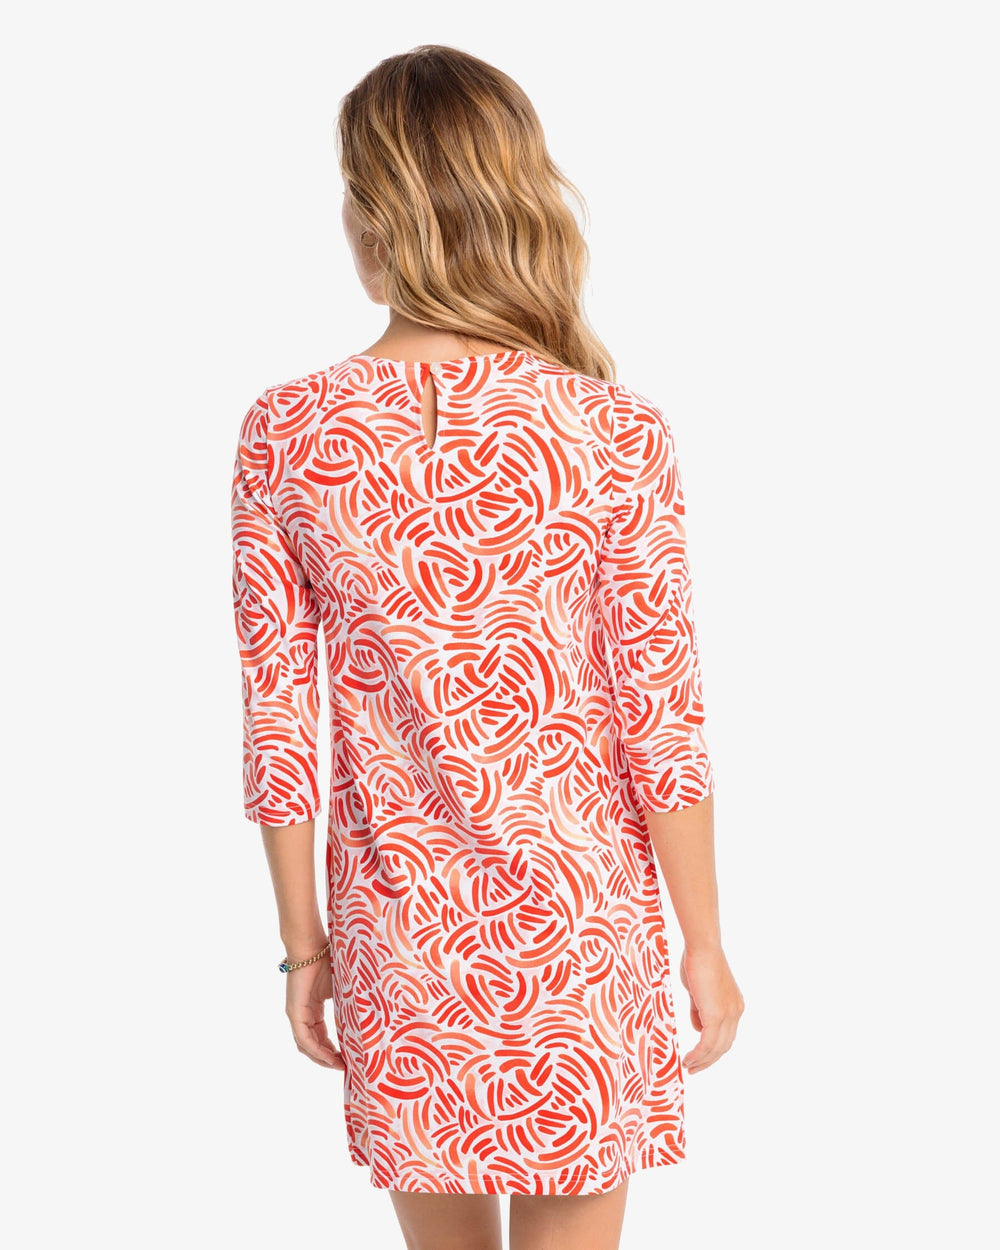 The back view of the Southern Tide Leila Watercolor Whirl Printed Performance Dress by Southern Tide - Flamingo Pink